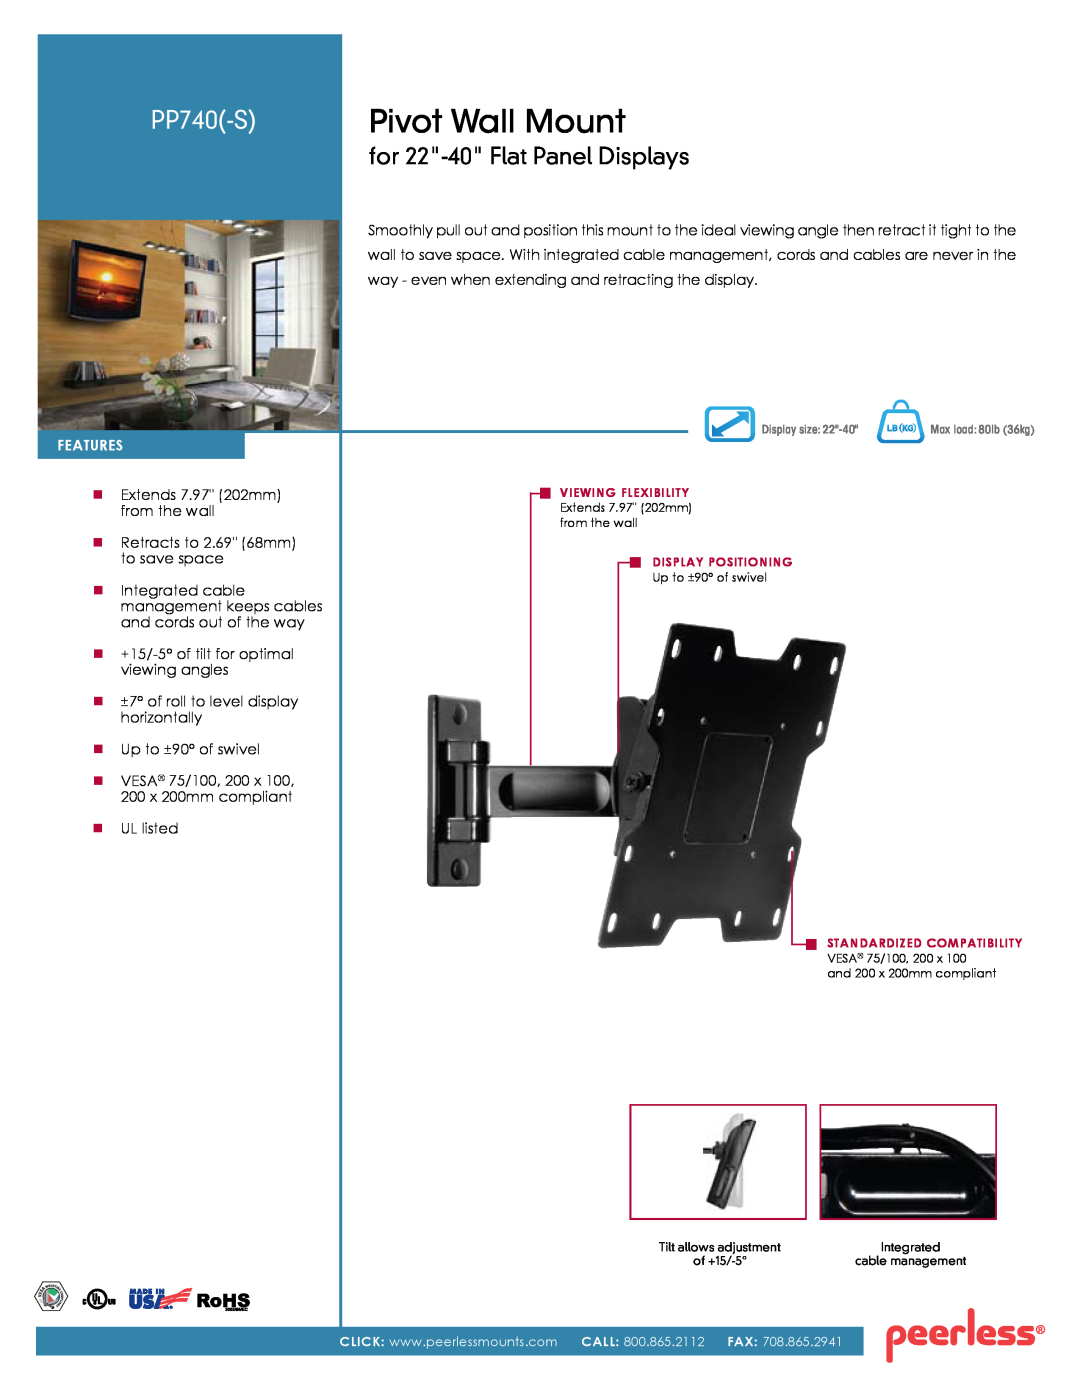 Peerless Industries PP740(-S) manual Pivot Wall Mount, PP740-S, for 22-40 Flat Panel Displays, FeatureS 